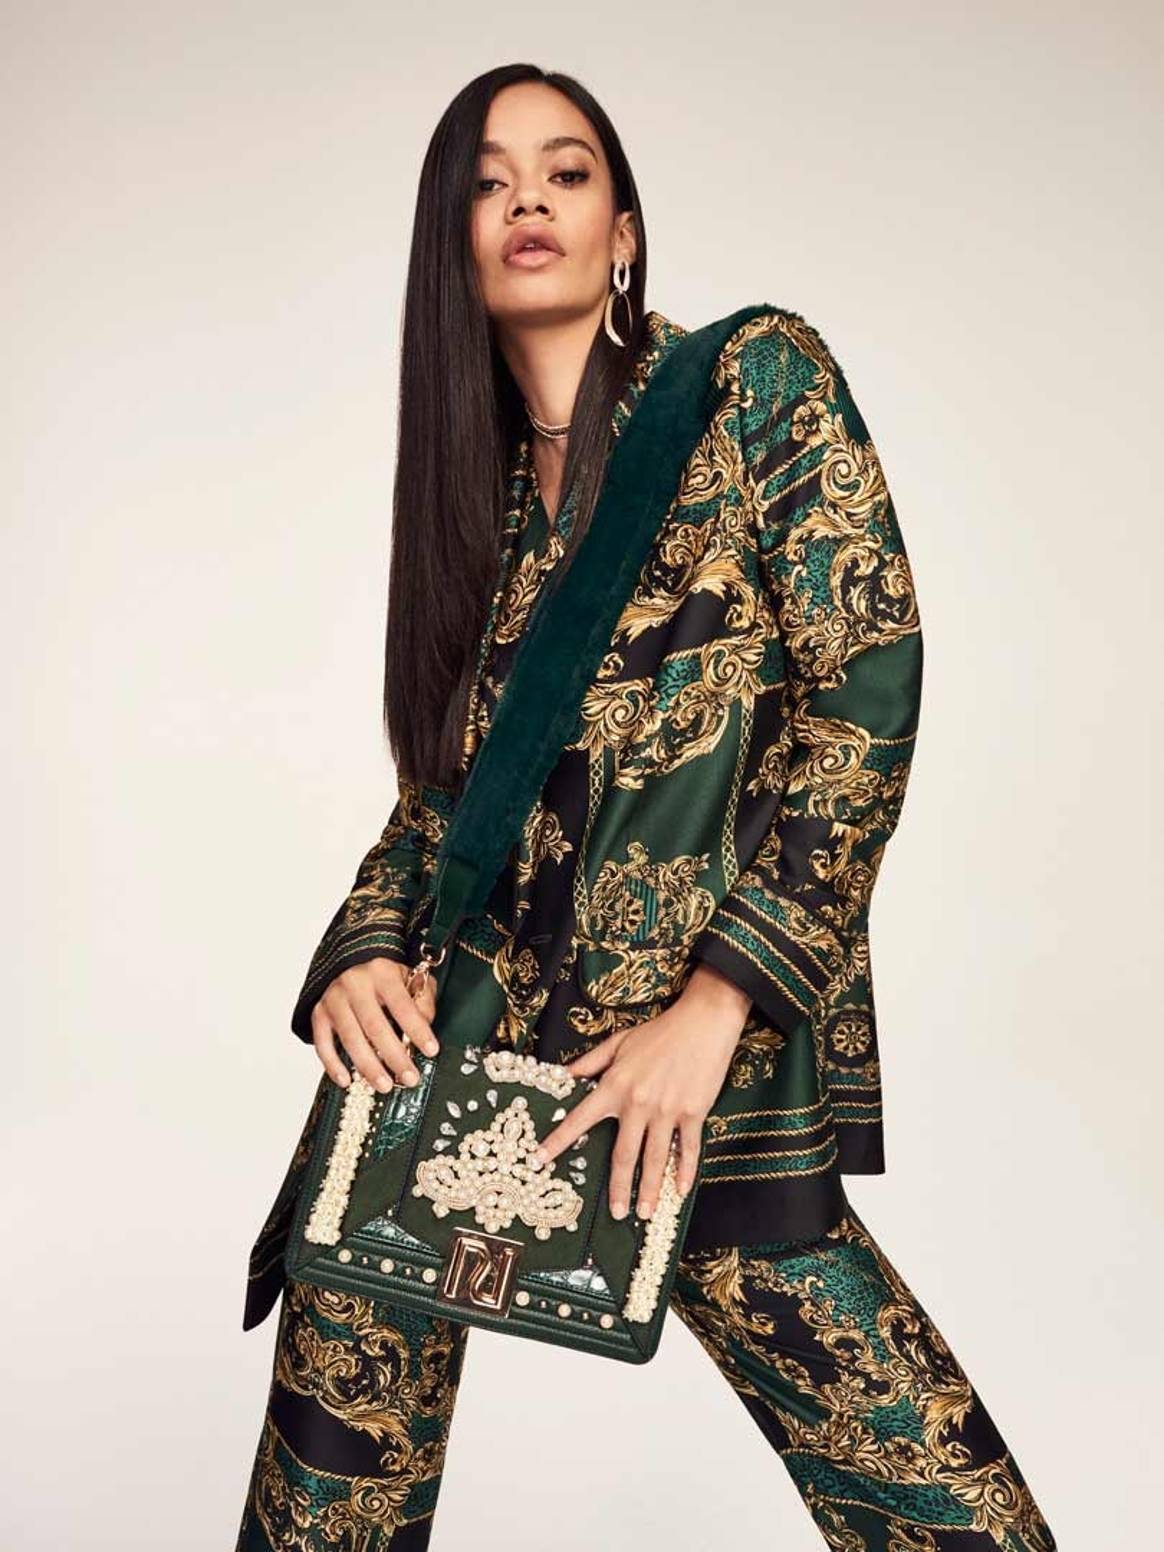 River Island launches 30th anniversary collection